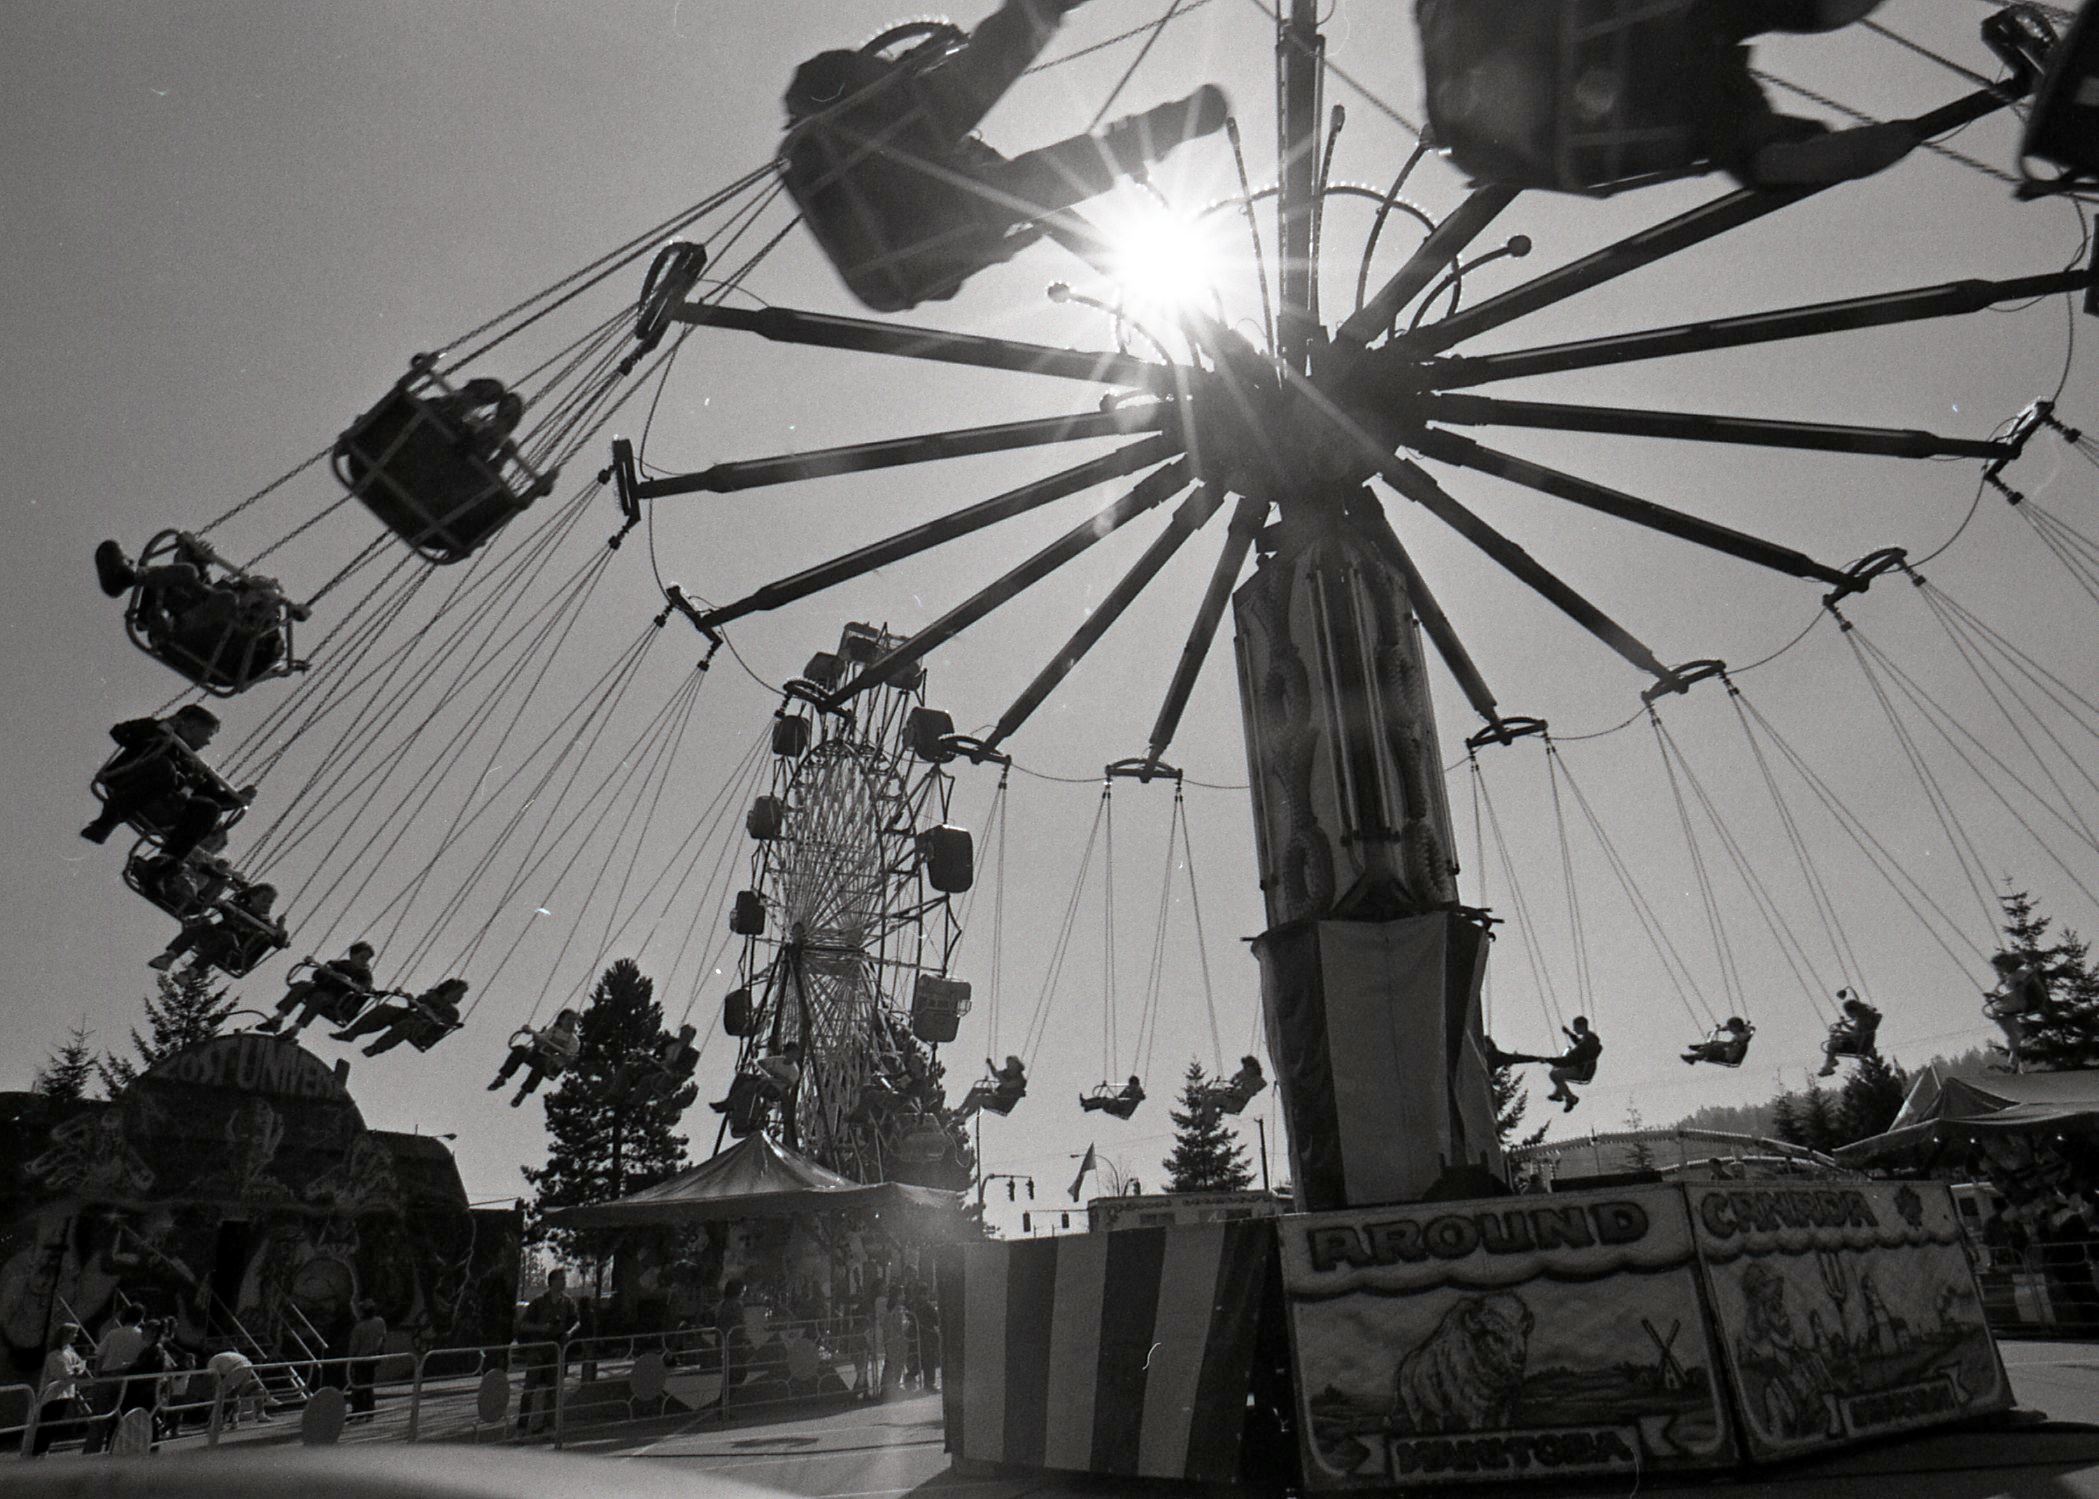 Spring Break Midway at Coquitlam Centre, 1995 (JPG) Opens in new window